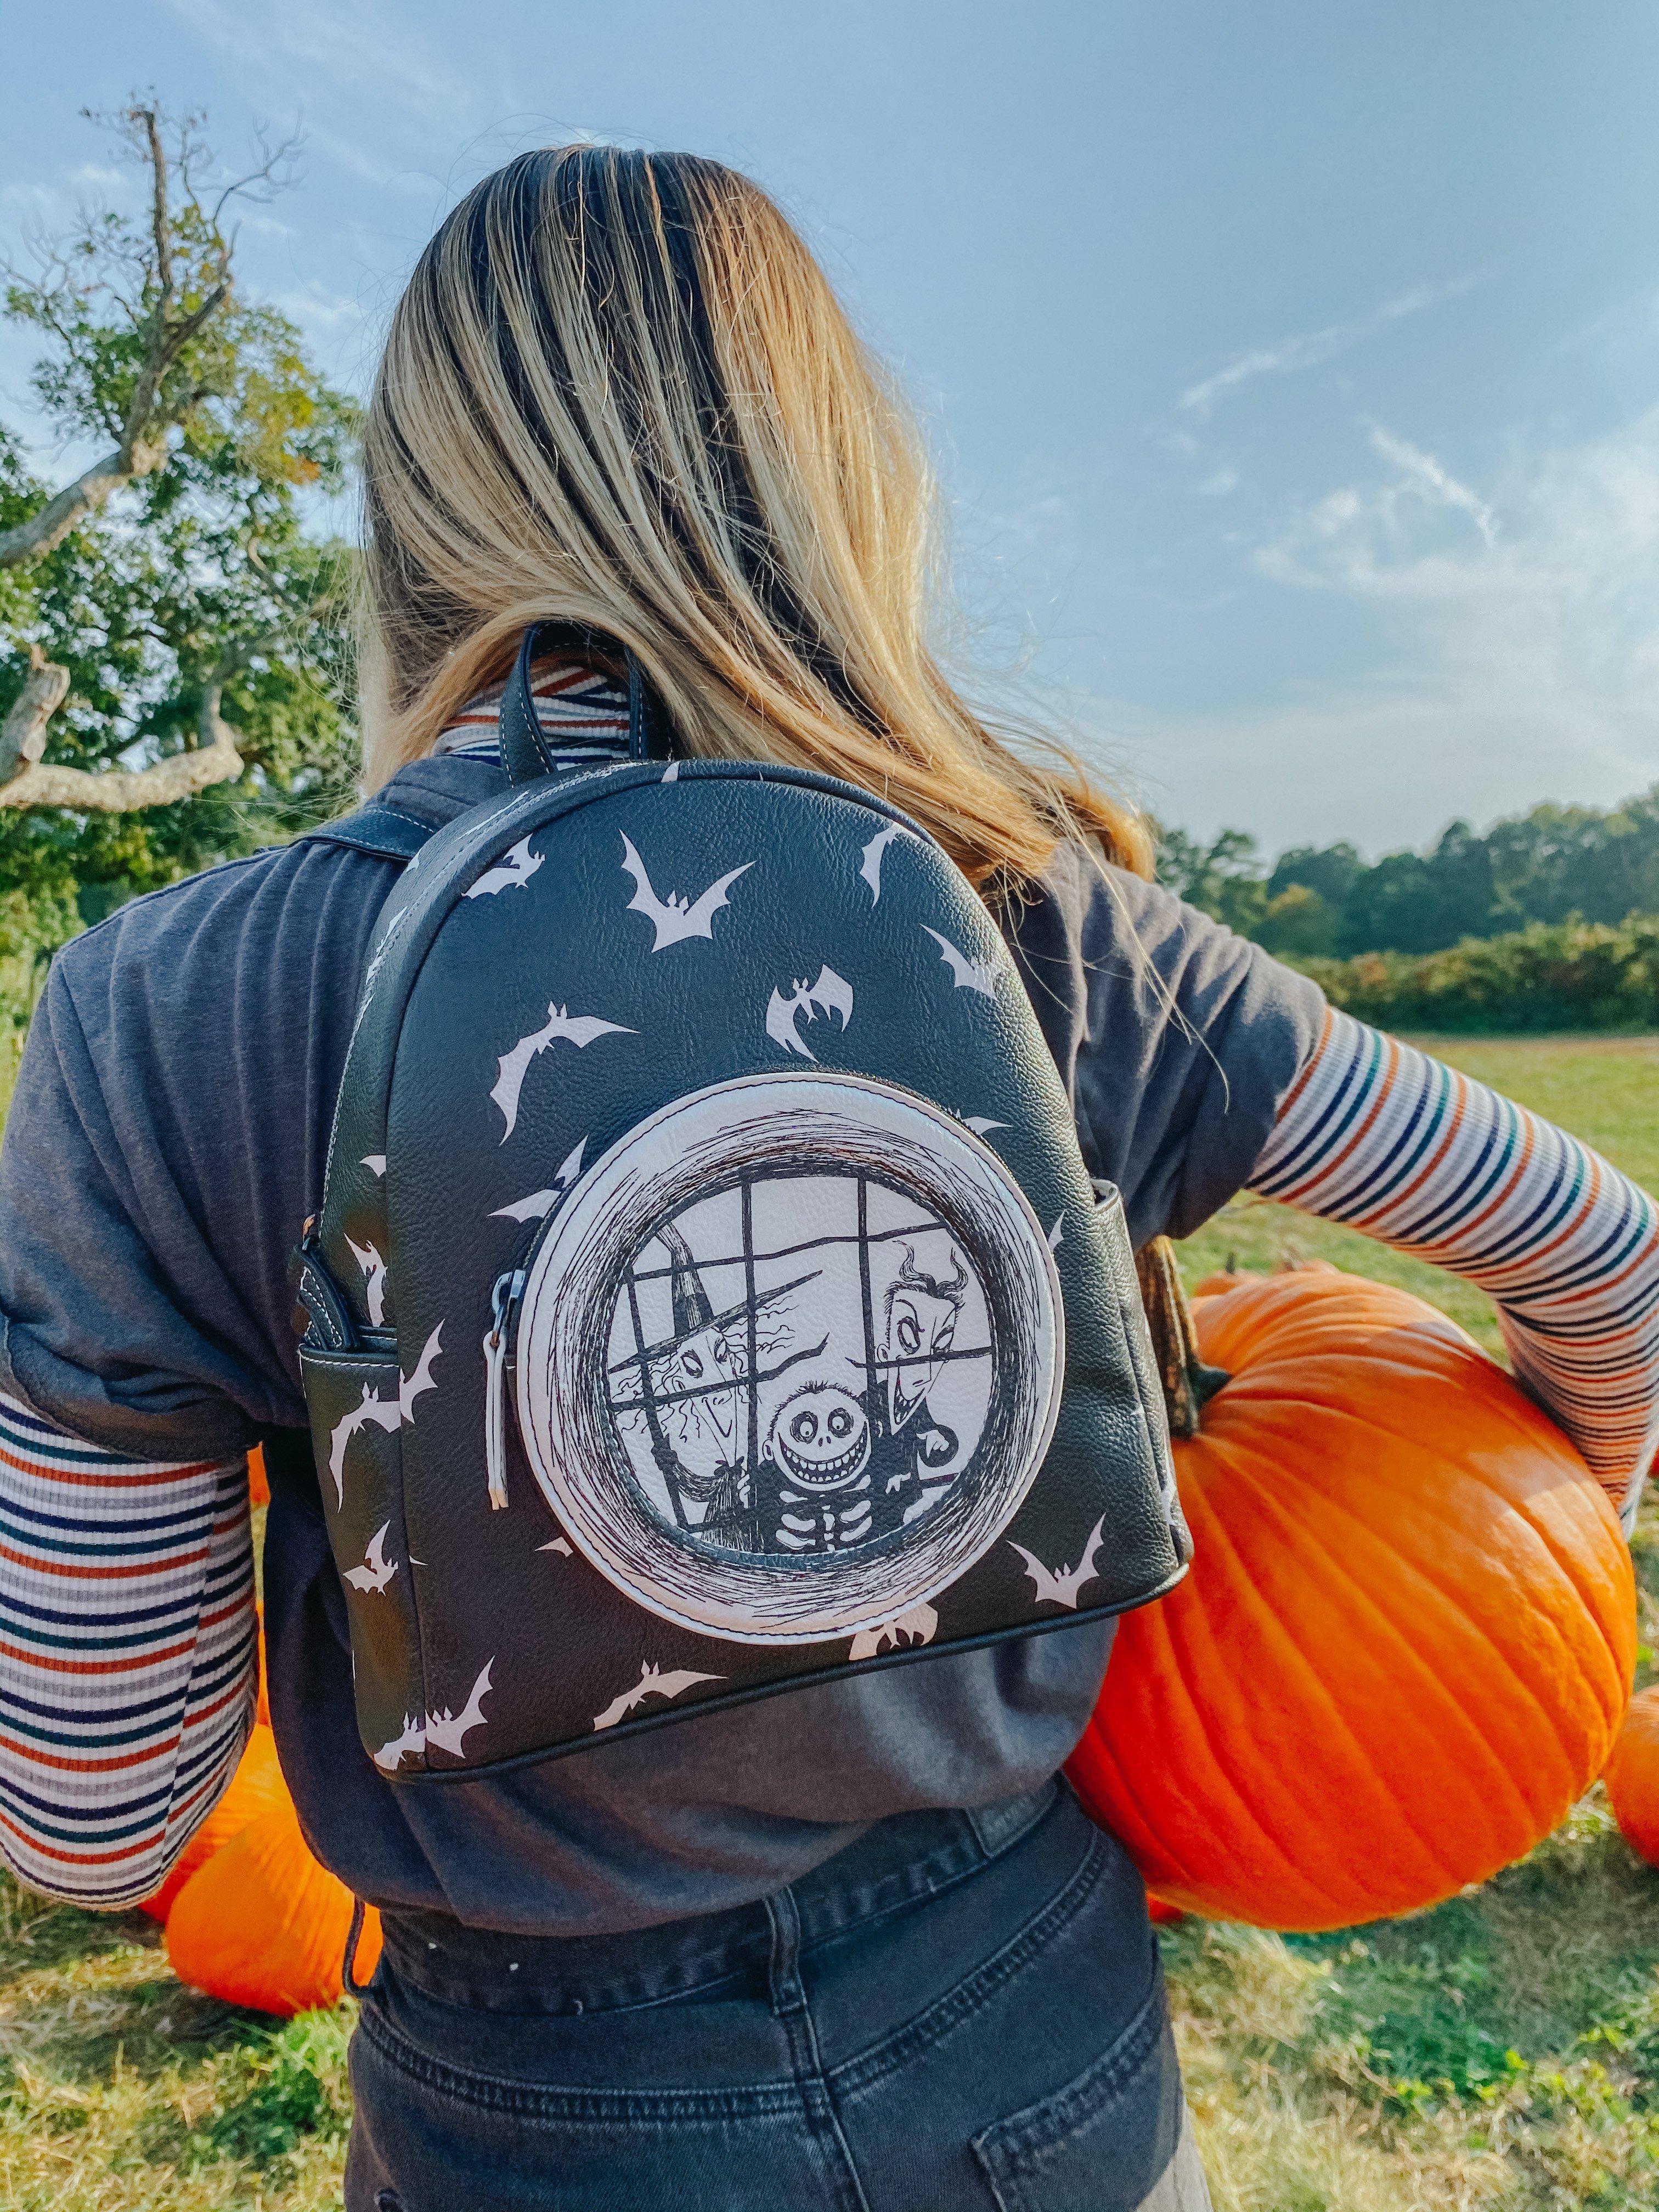 The Nightmare Before Christmas Mini Backpack by Danielle Nicole